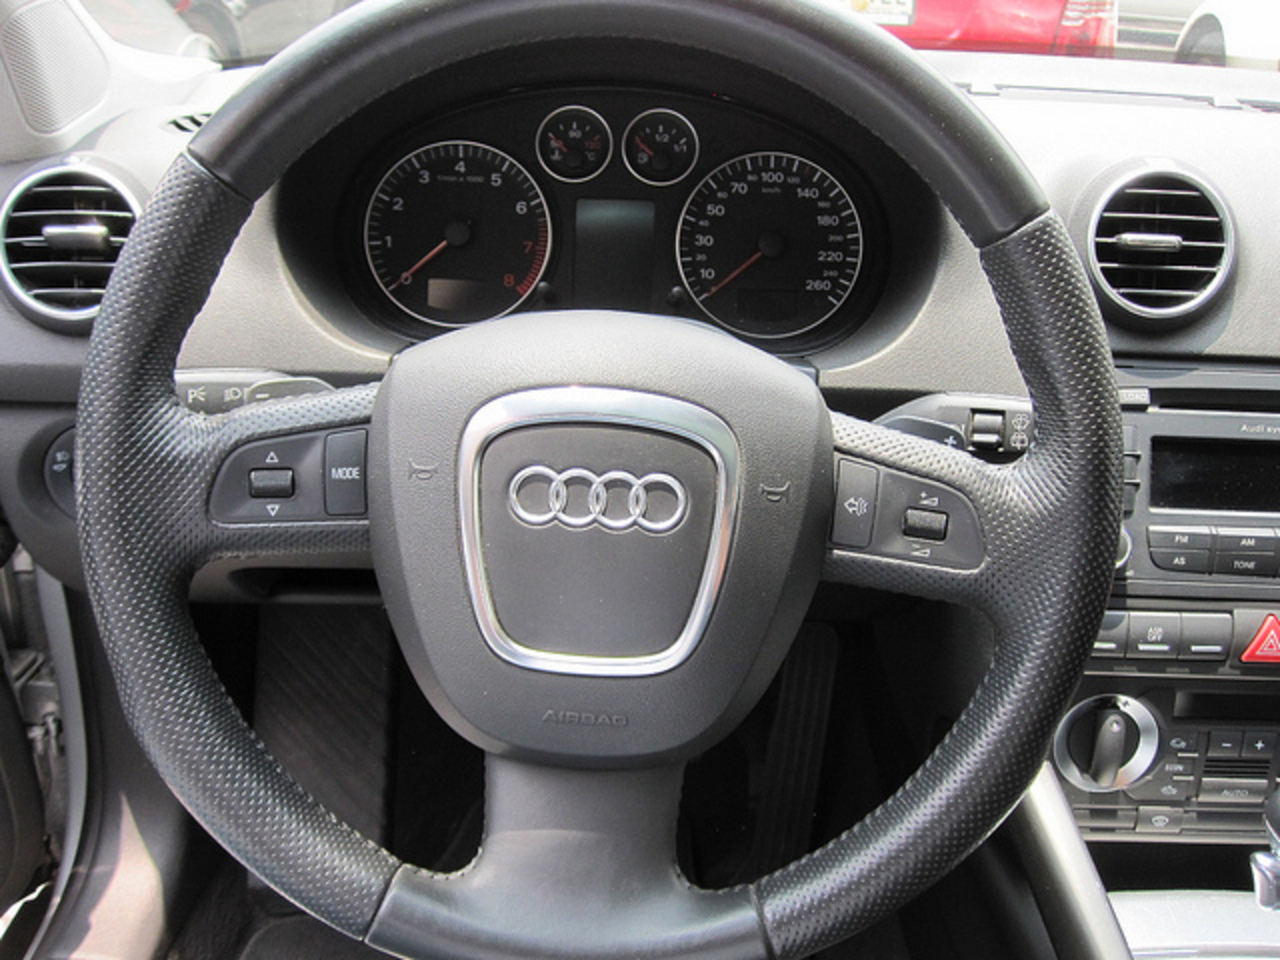 2008 Audi A3, 1.8 T Tiptronic | Flickr - Photo Sharing!